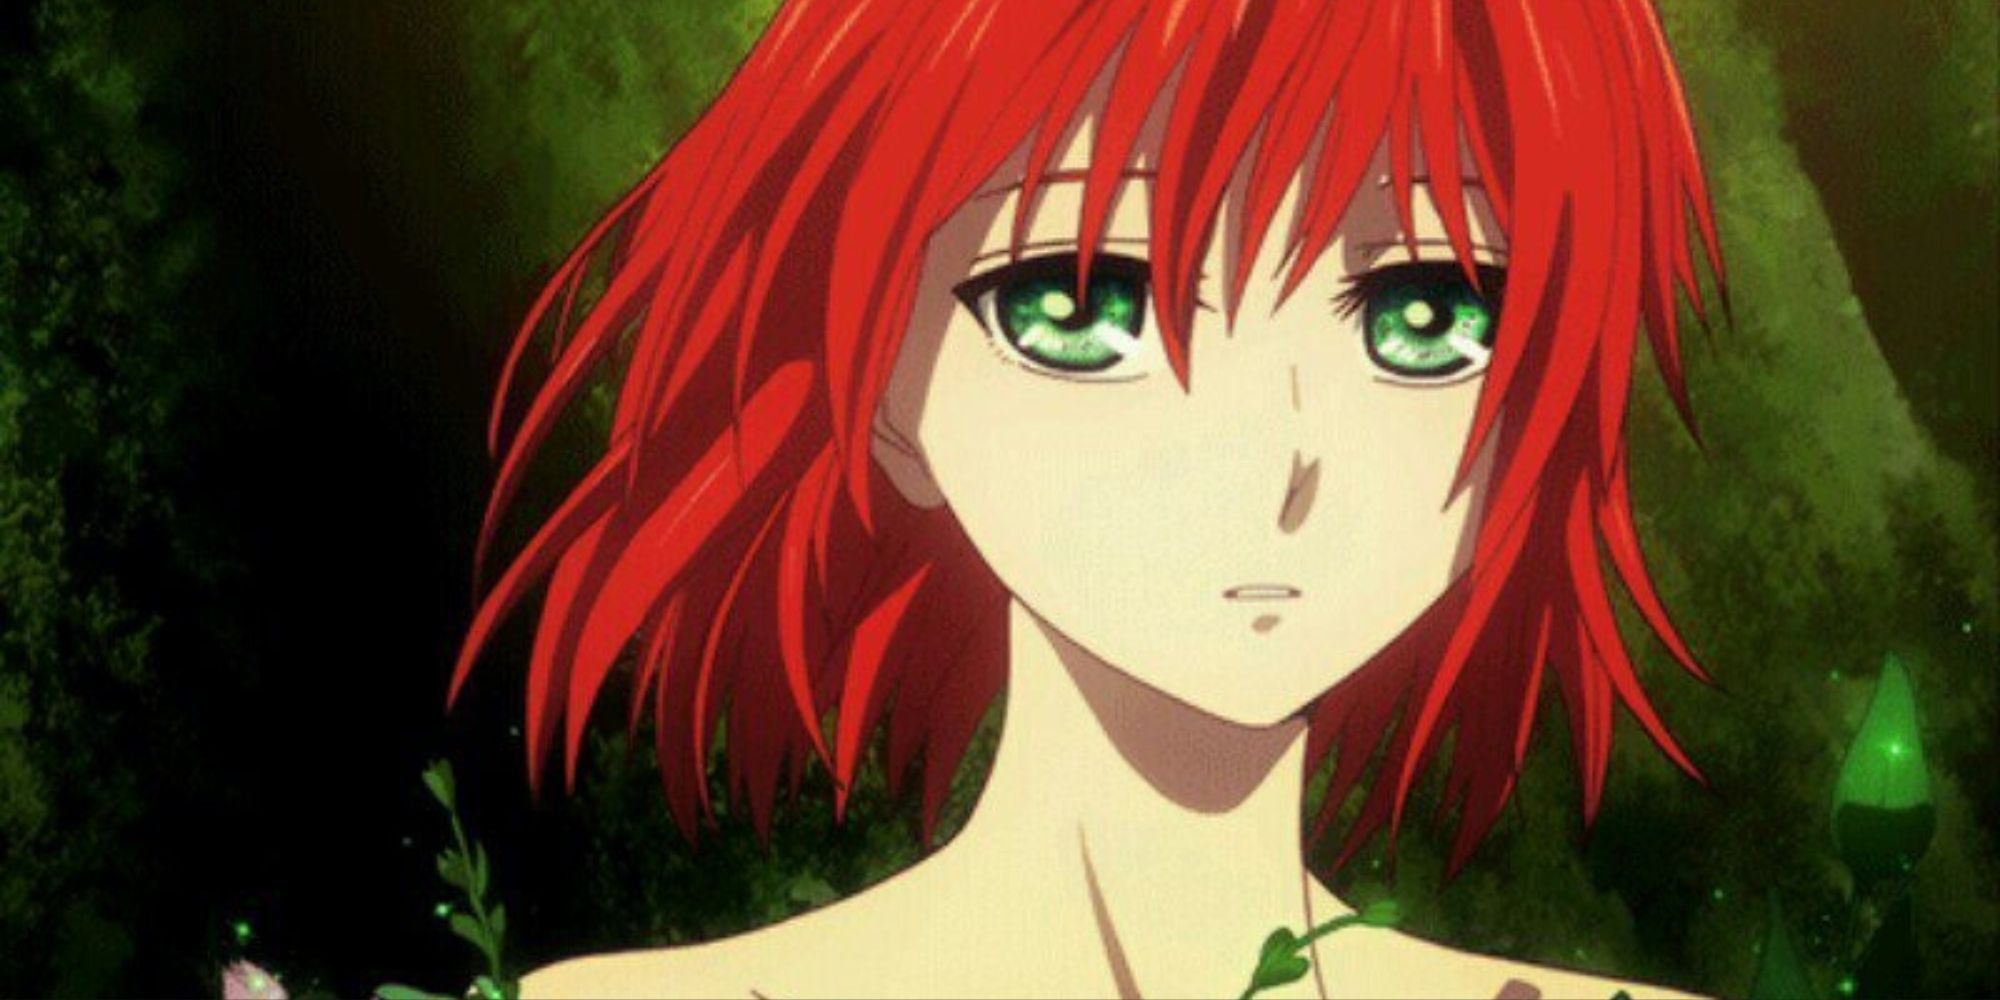 Chise Hatori in the ancient magus bride 